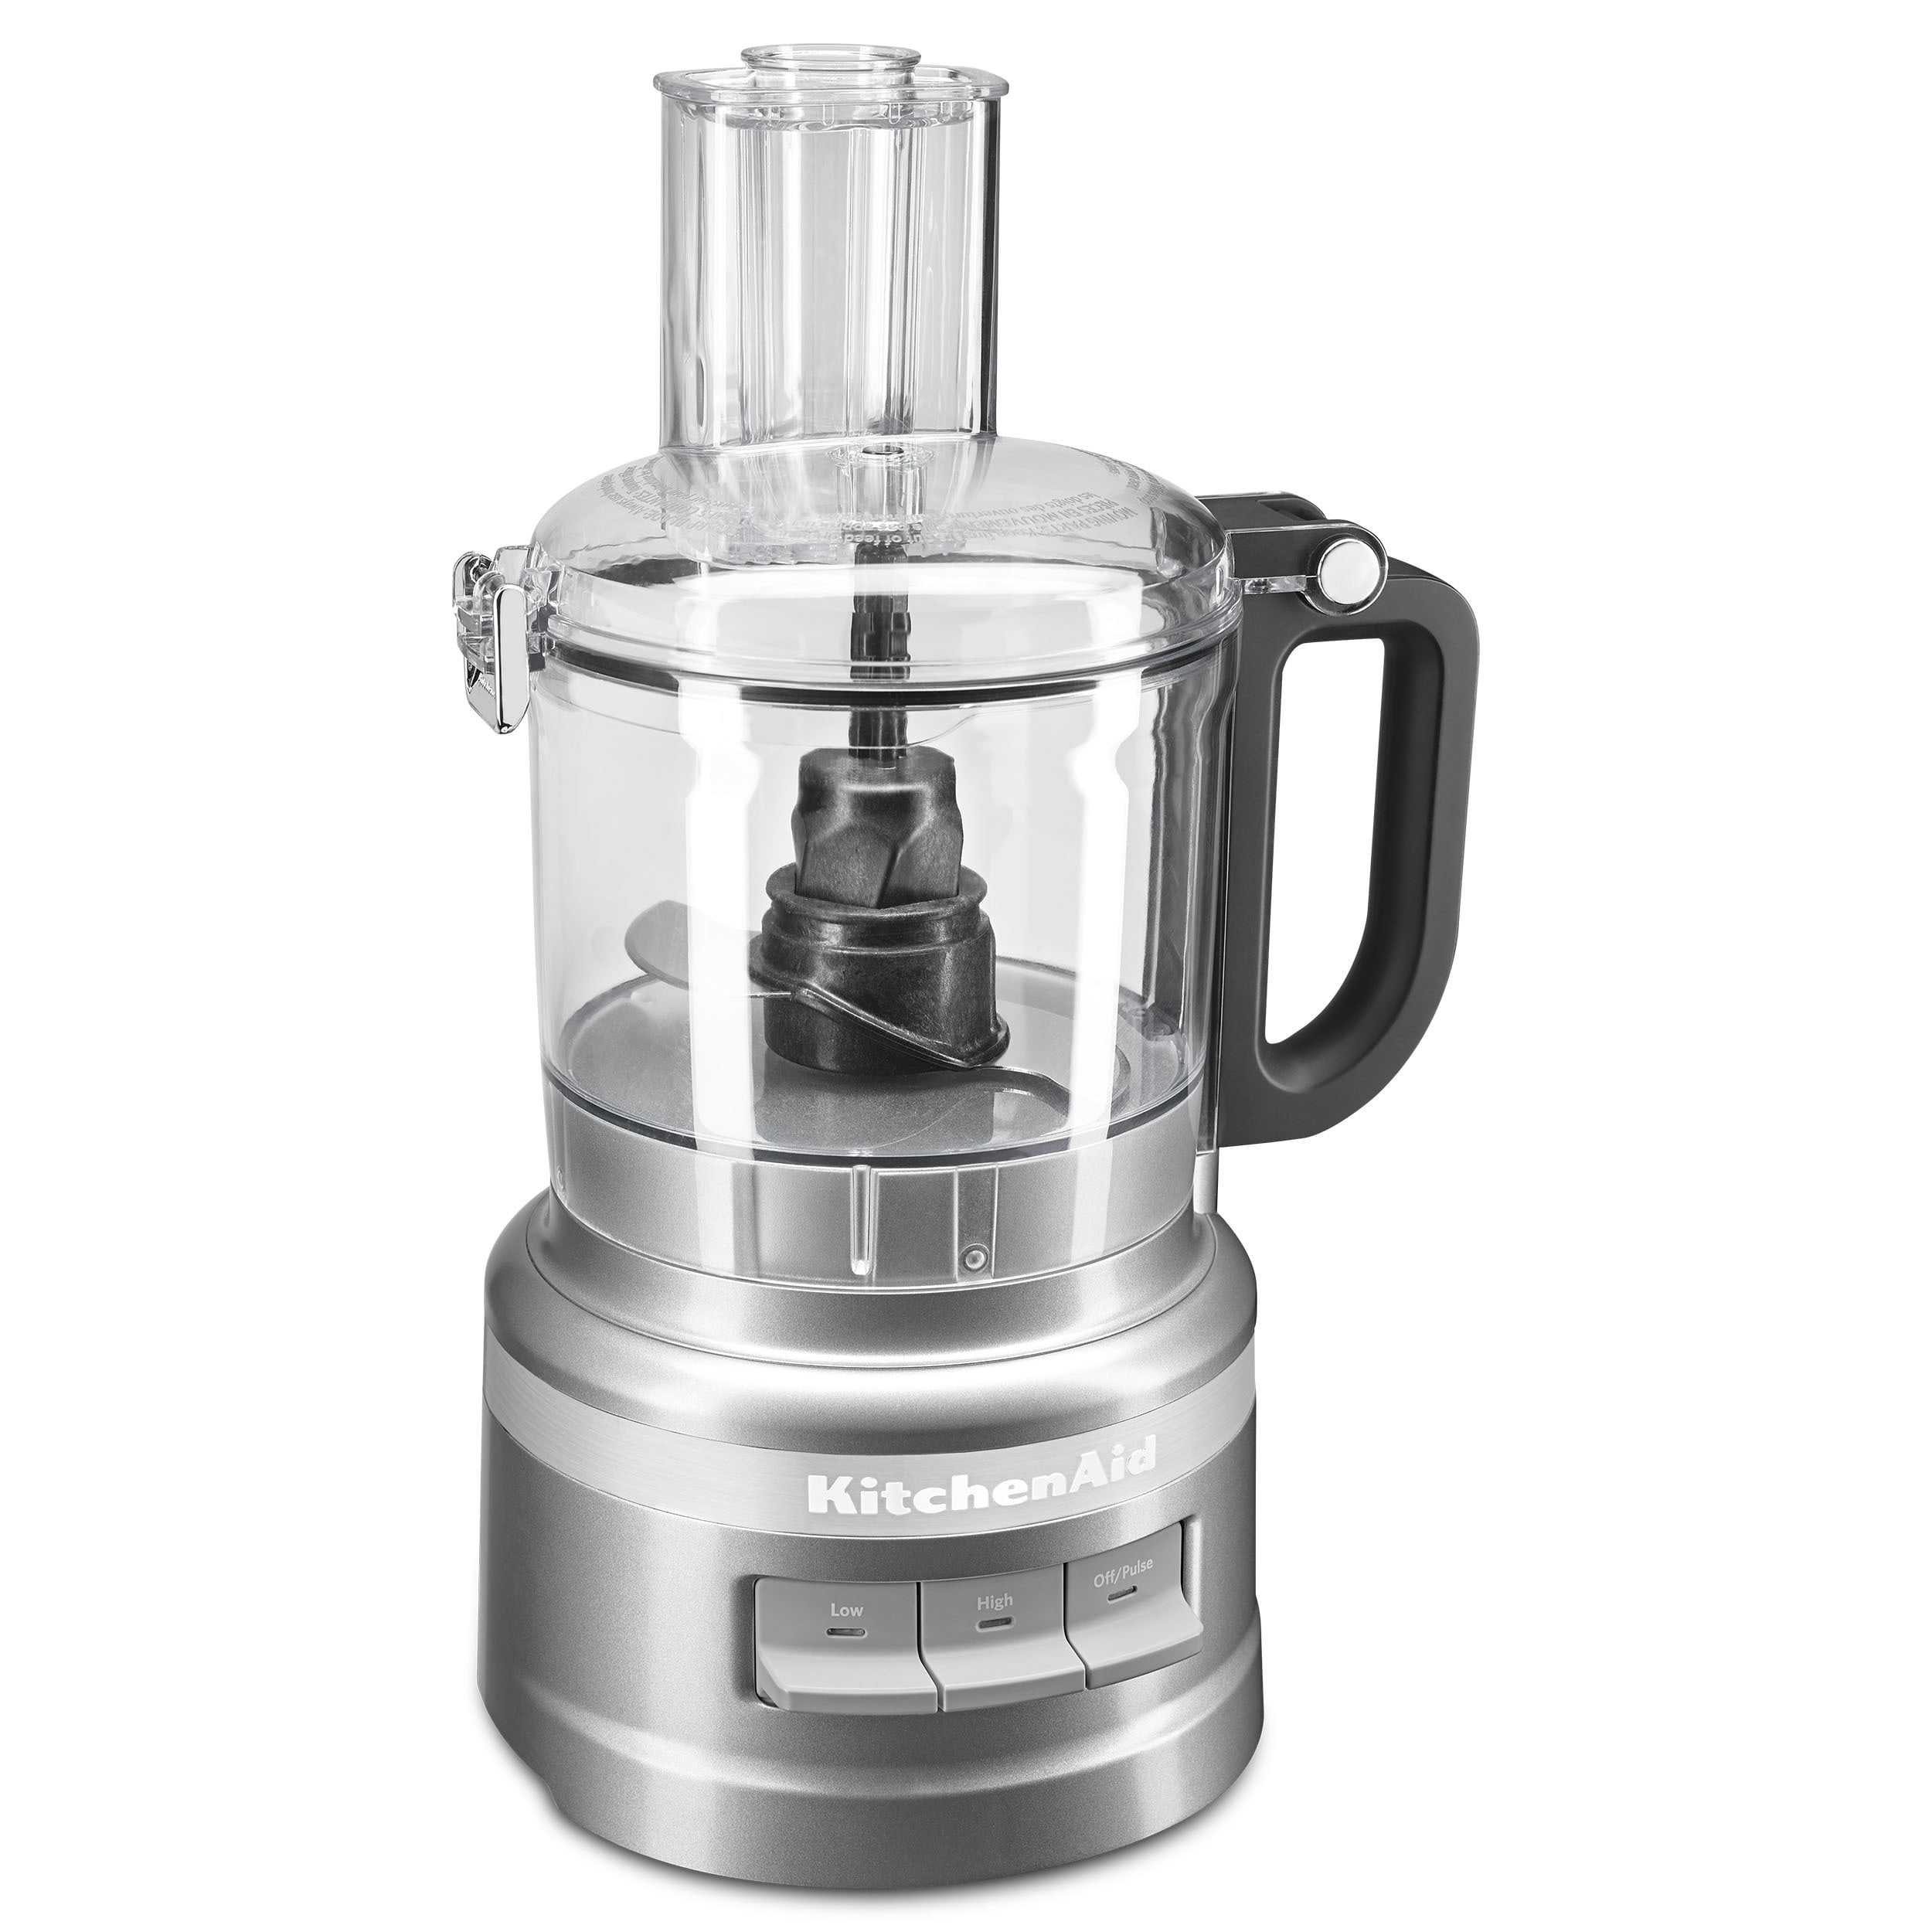 Best Buy: KitchenAid KFP0711WH 7-Cup Food Processor White KFP0711WH